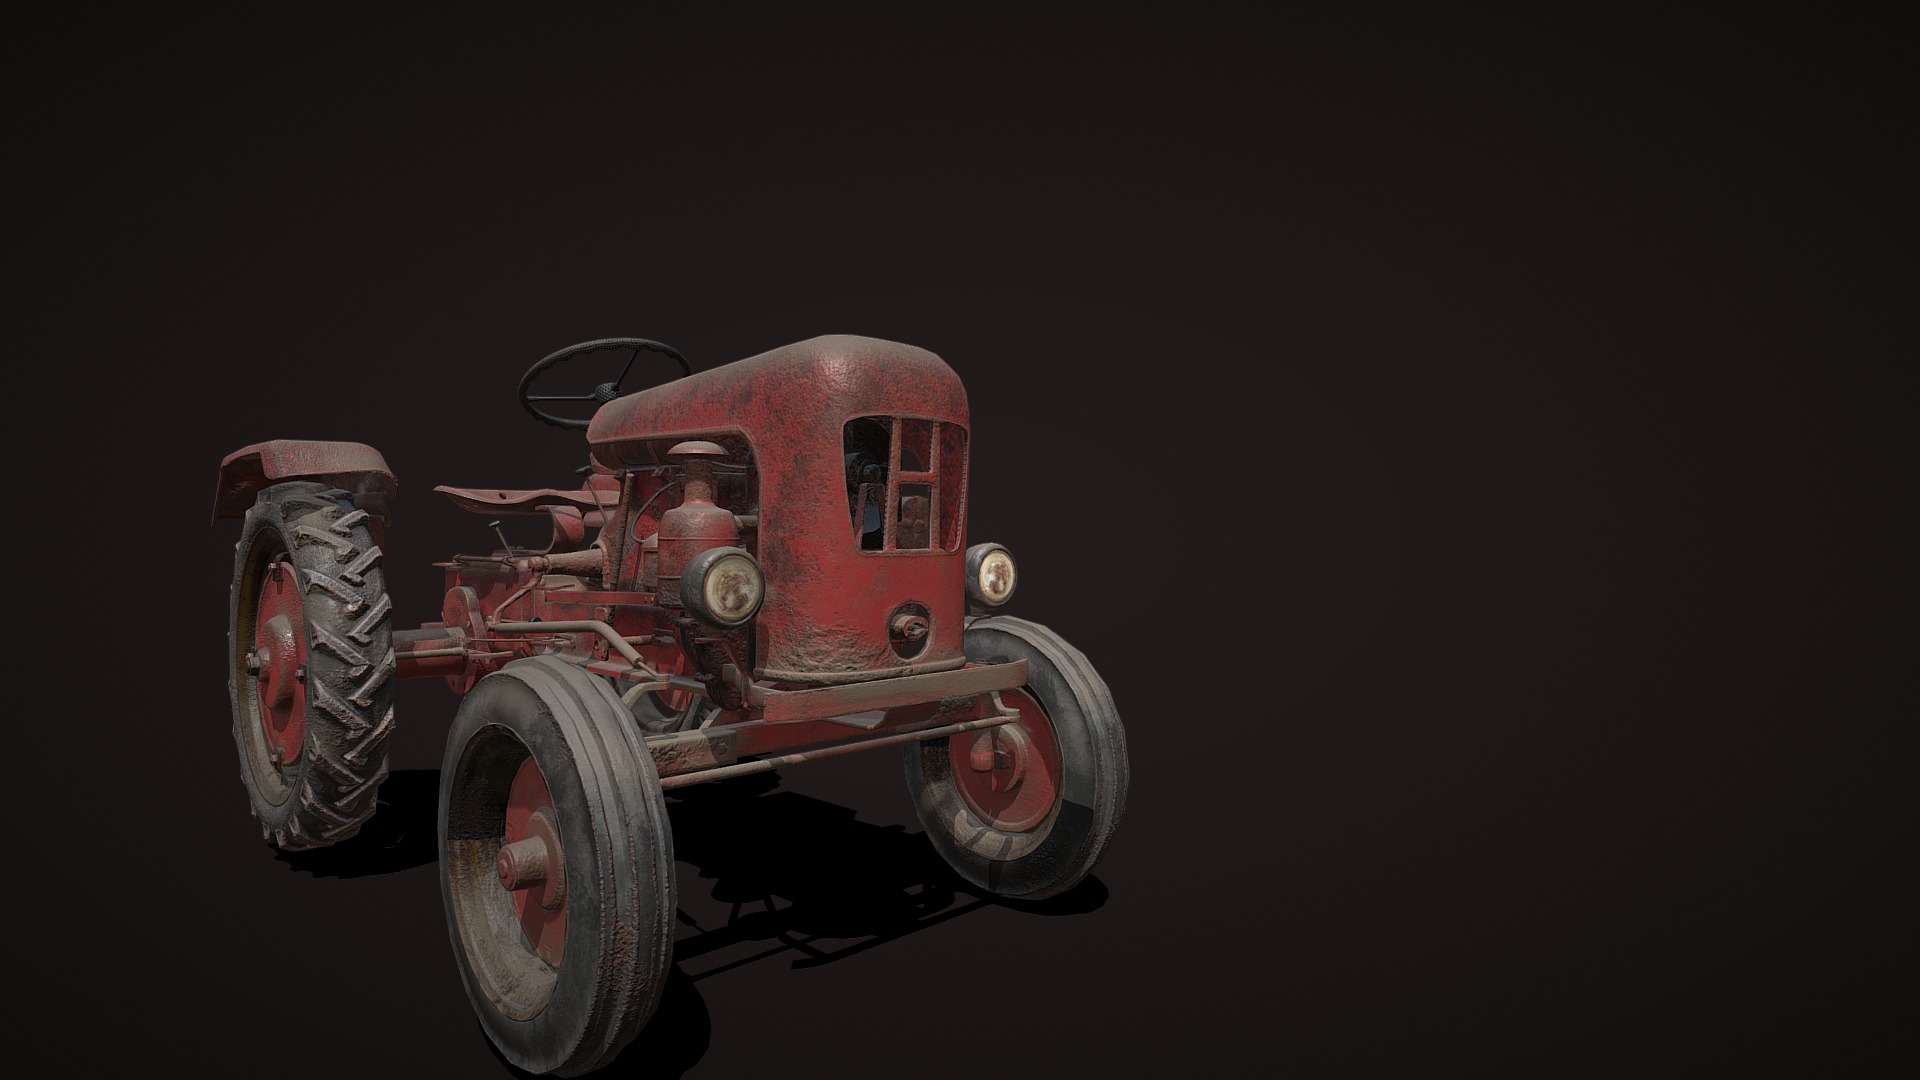 3D model Tractor old - This is a 3D model of the Tractor old. The 3D model is about a red tractor with a black background.